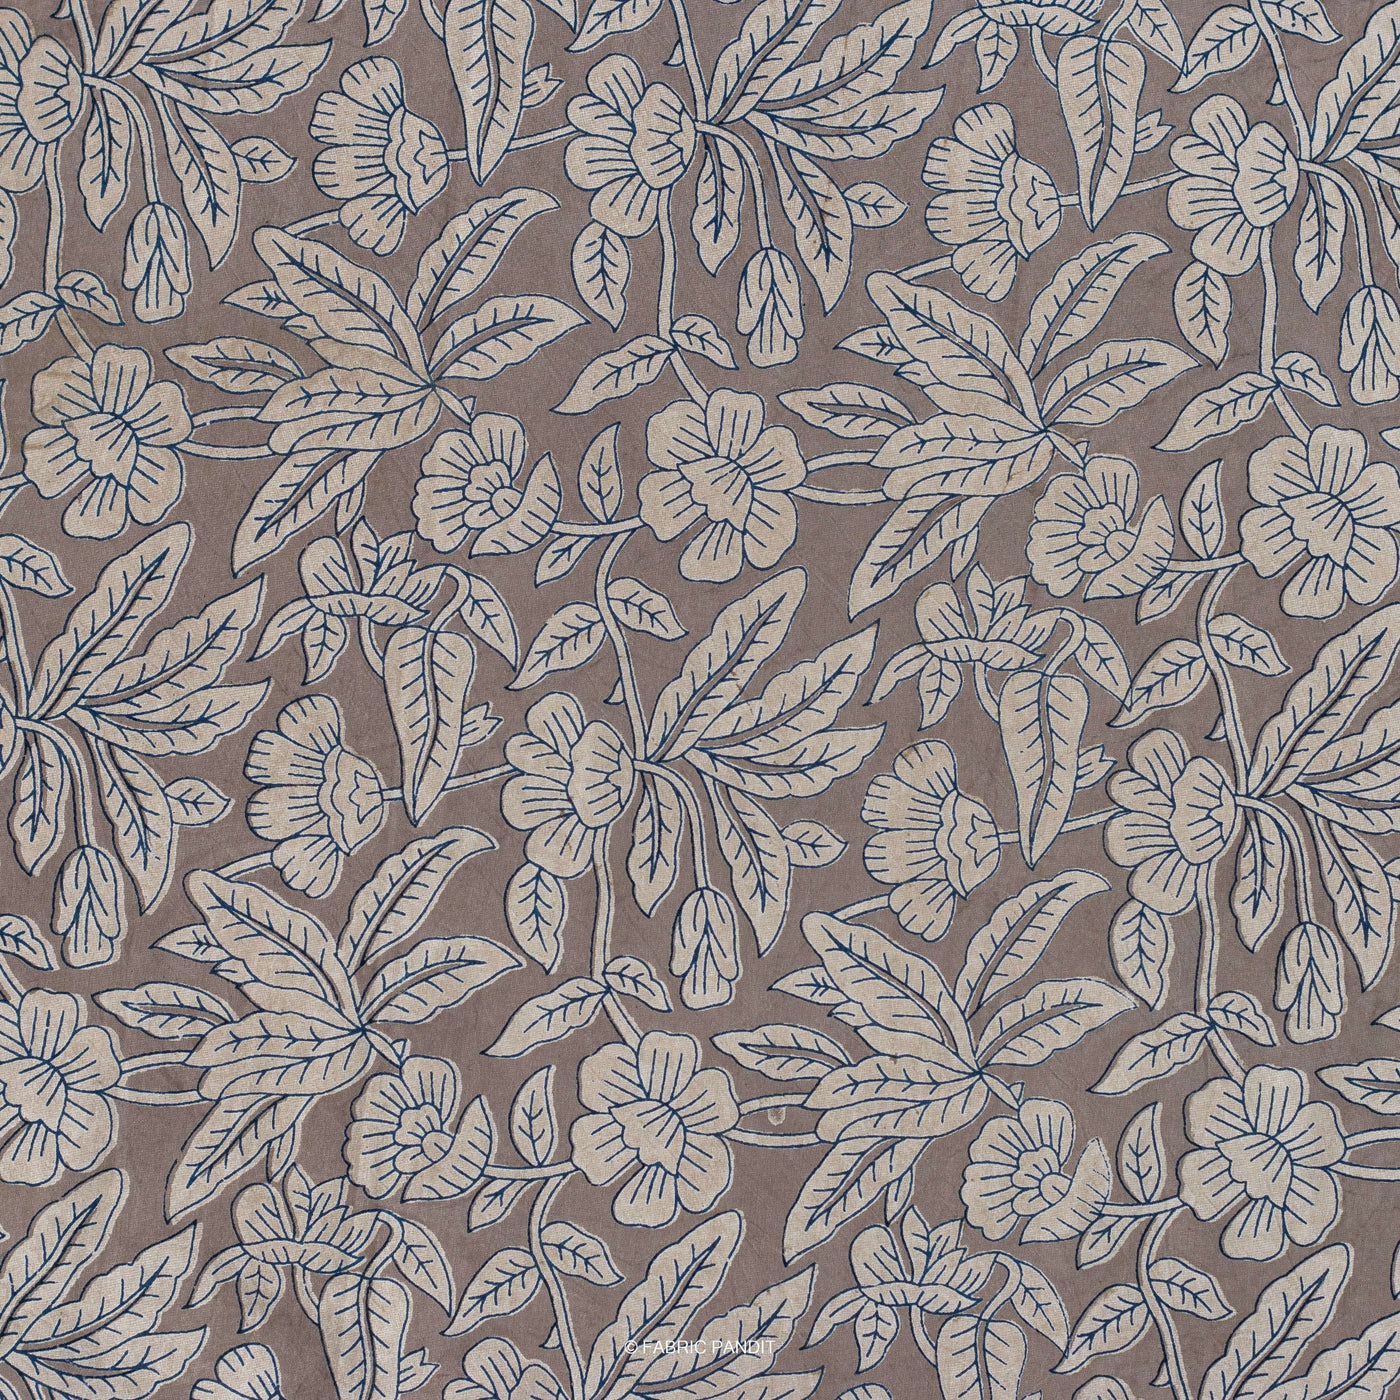 Fabric Pandit Fabric Mud Brown Floral Vines Hand Block Printed Pure Cotton Fabric (Width 43 Inches)